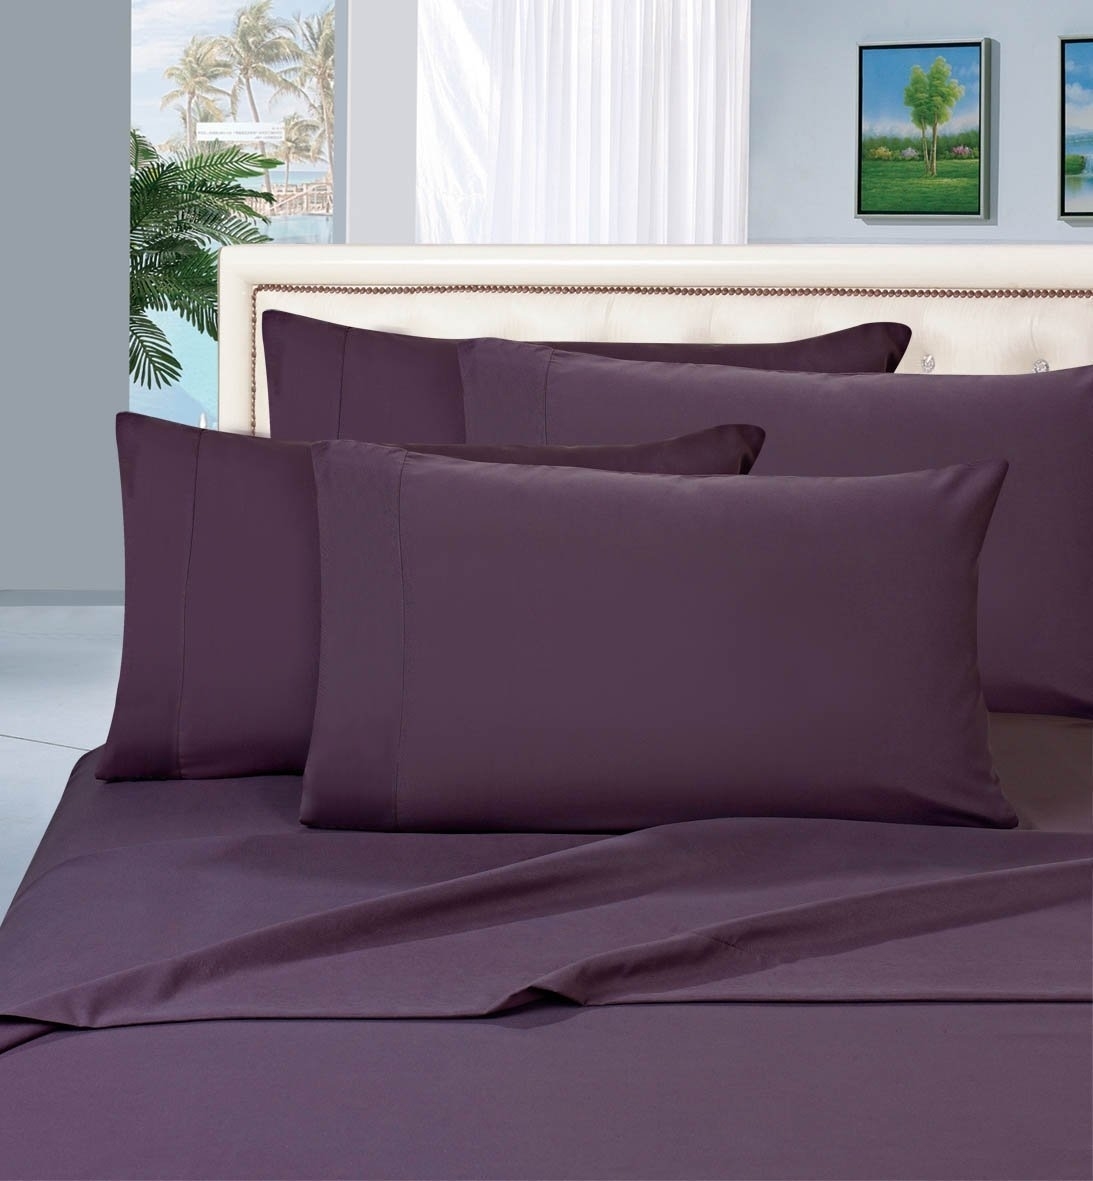 Elegant Comfort 1500 Series Wrinkle Resistant Egyptian Quality Hypoallergenic Ultra Soft Luxury 3-piece Bed Sheet Set, Twin, Purple